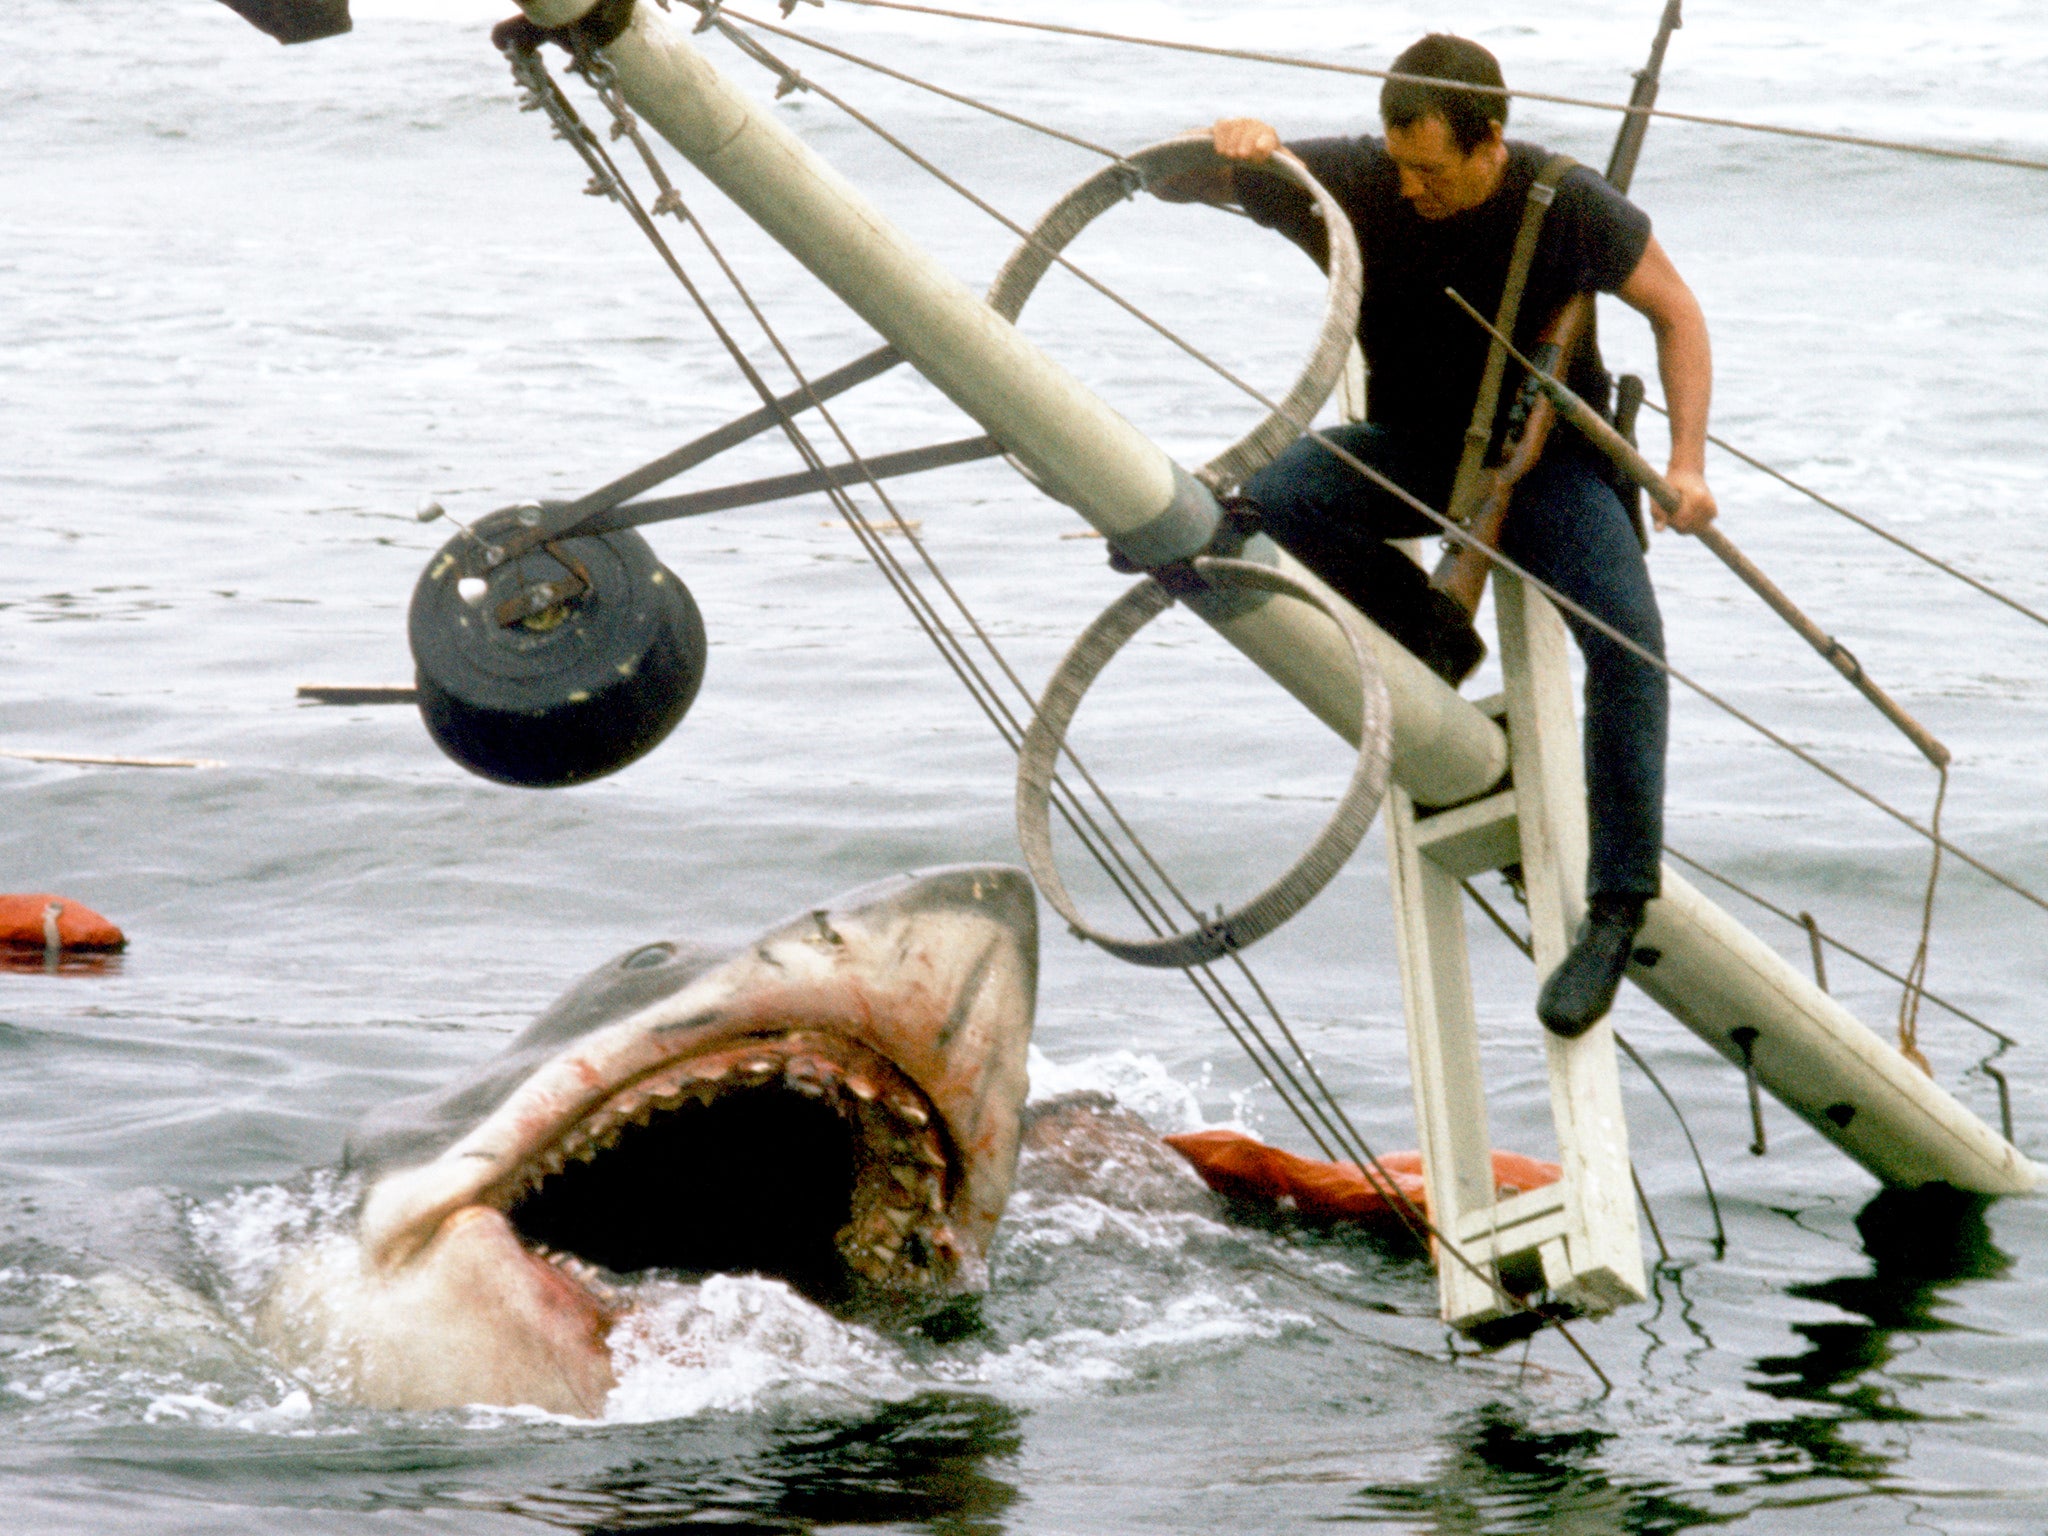 Roy Schneider tackling the great white in Jaws